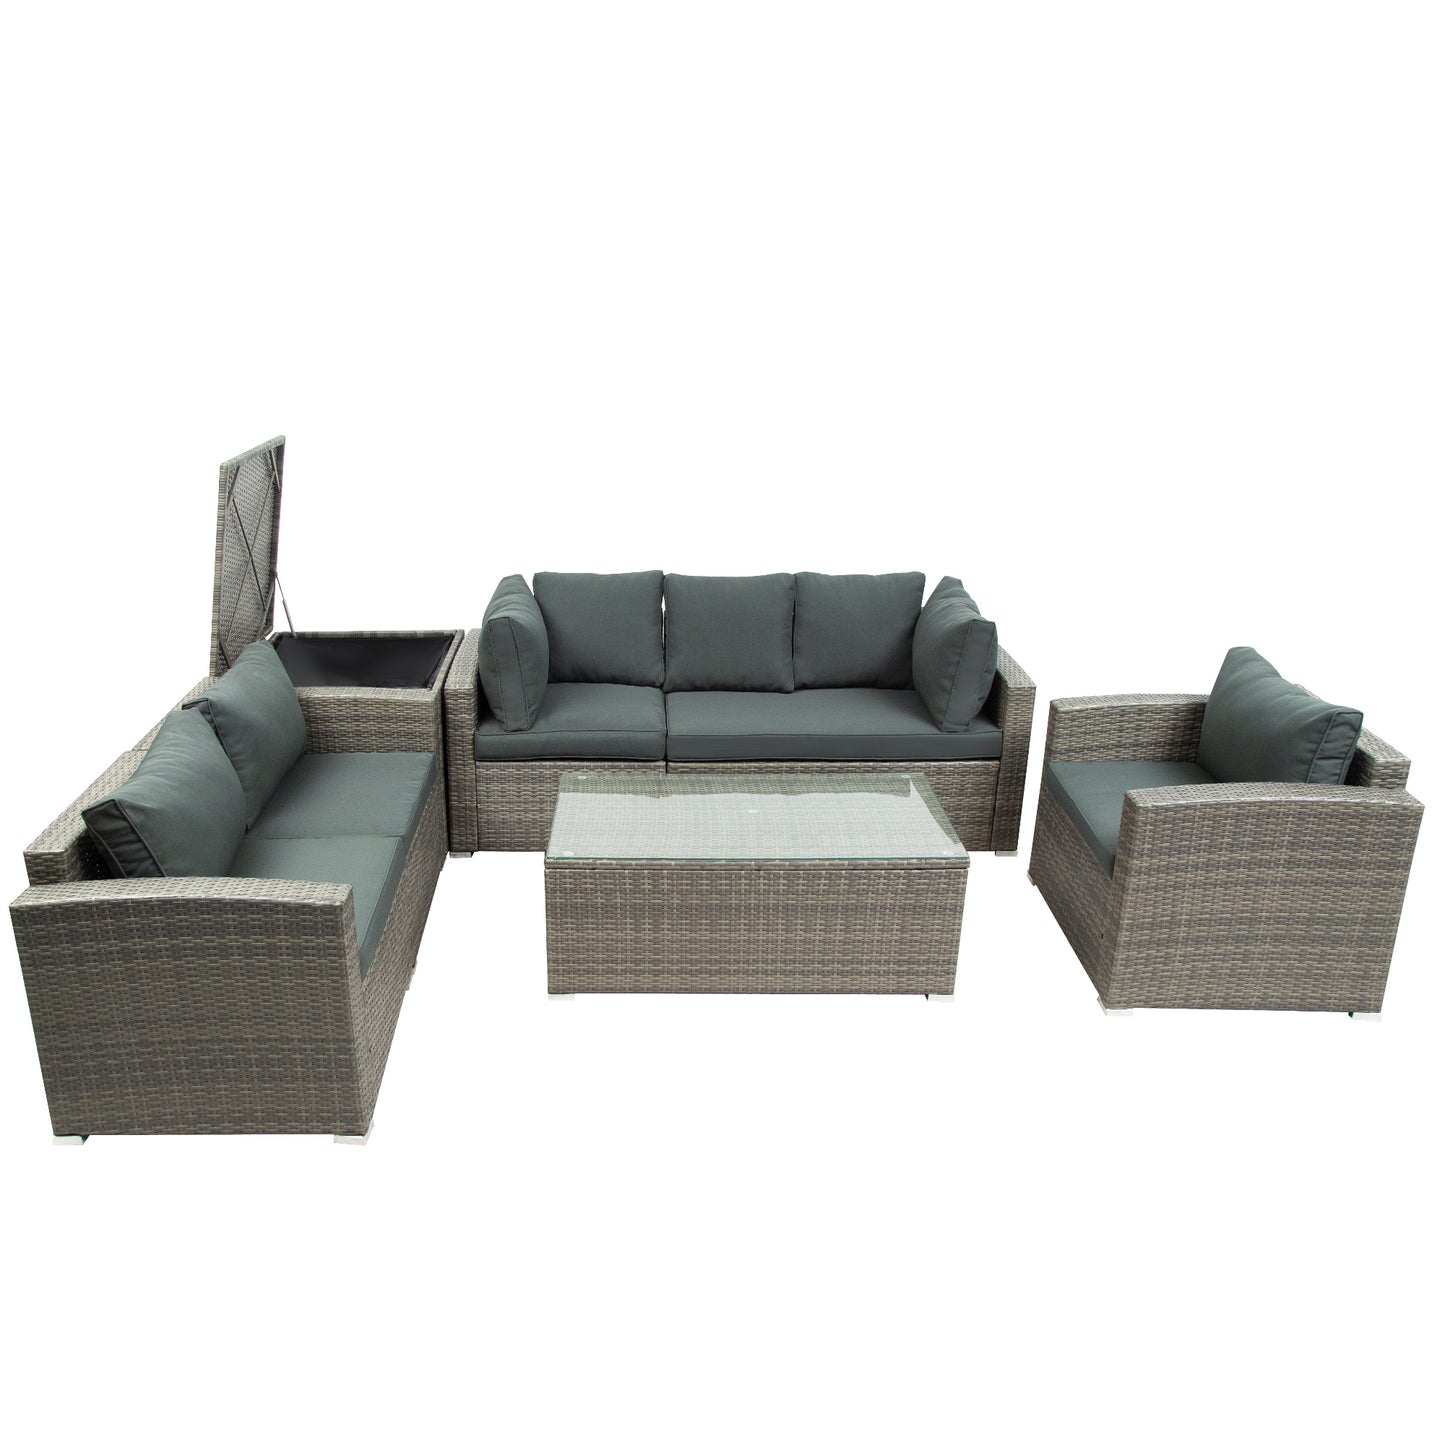 U_STYLE Patio Furniture Sets, 7-Piece Patio Wicker Sofa , Cushions, Chairs , a Loveseat , a Table and a Storage Box